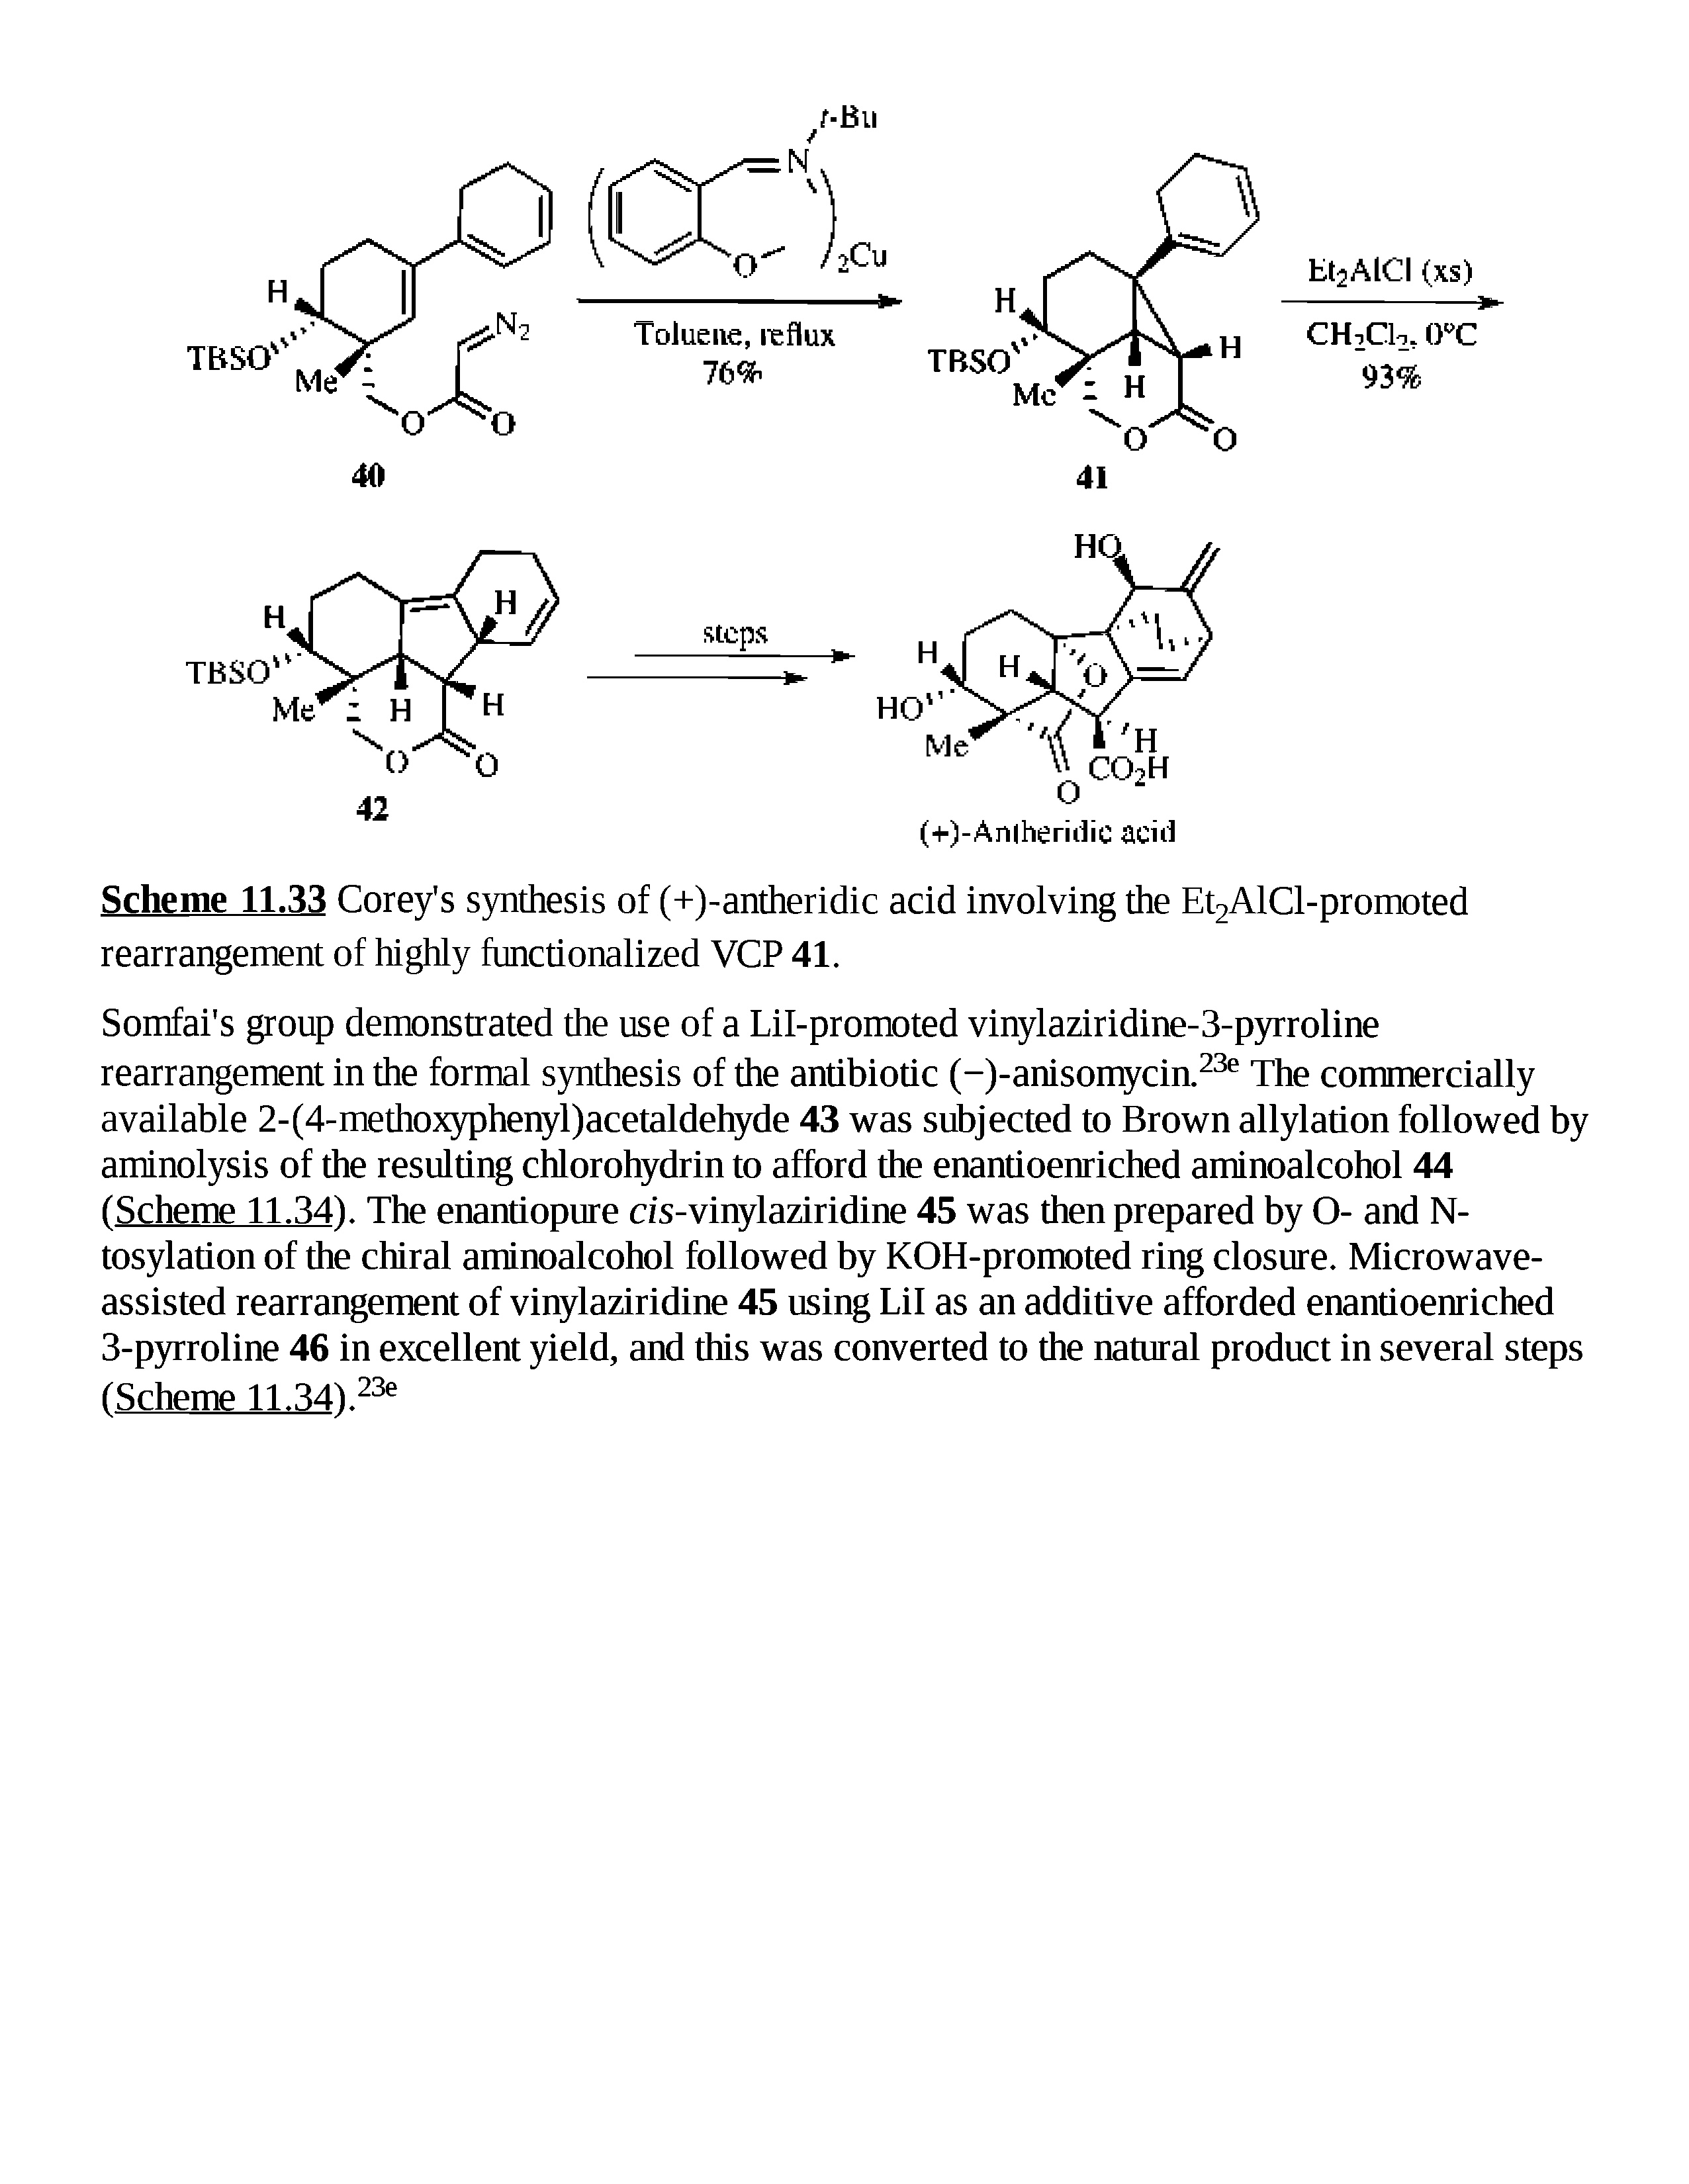 Scheme 11.33 Corey s synthesis of (+)-antheridic acid involving the Et2AlCl-promoted rearrangement of highly functionalized VCP 41.